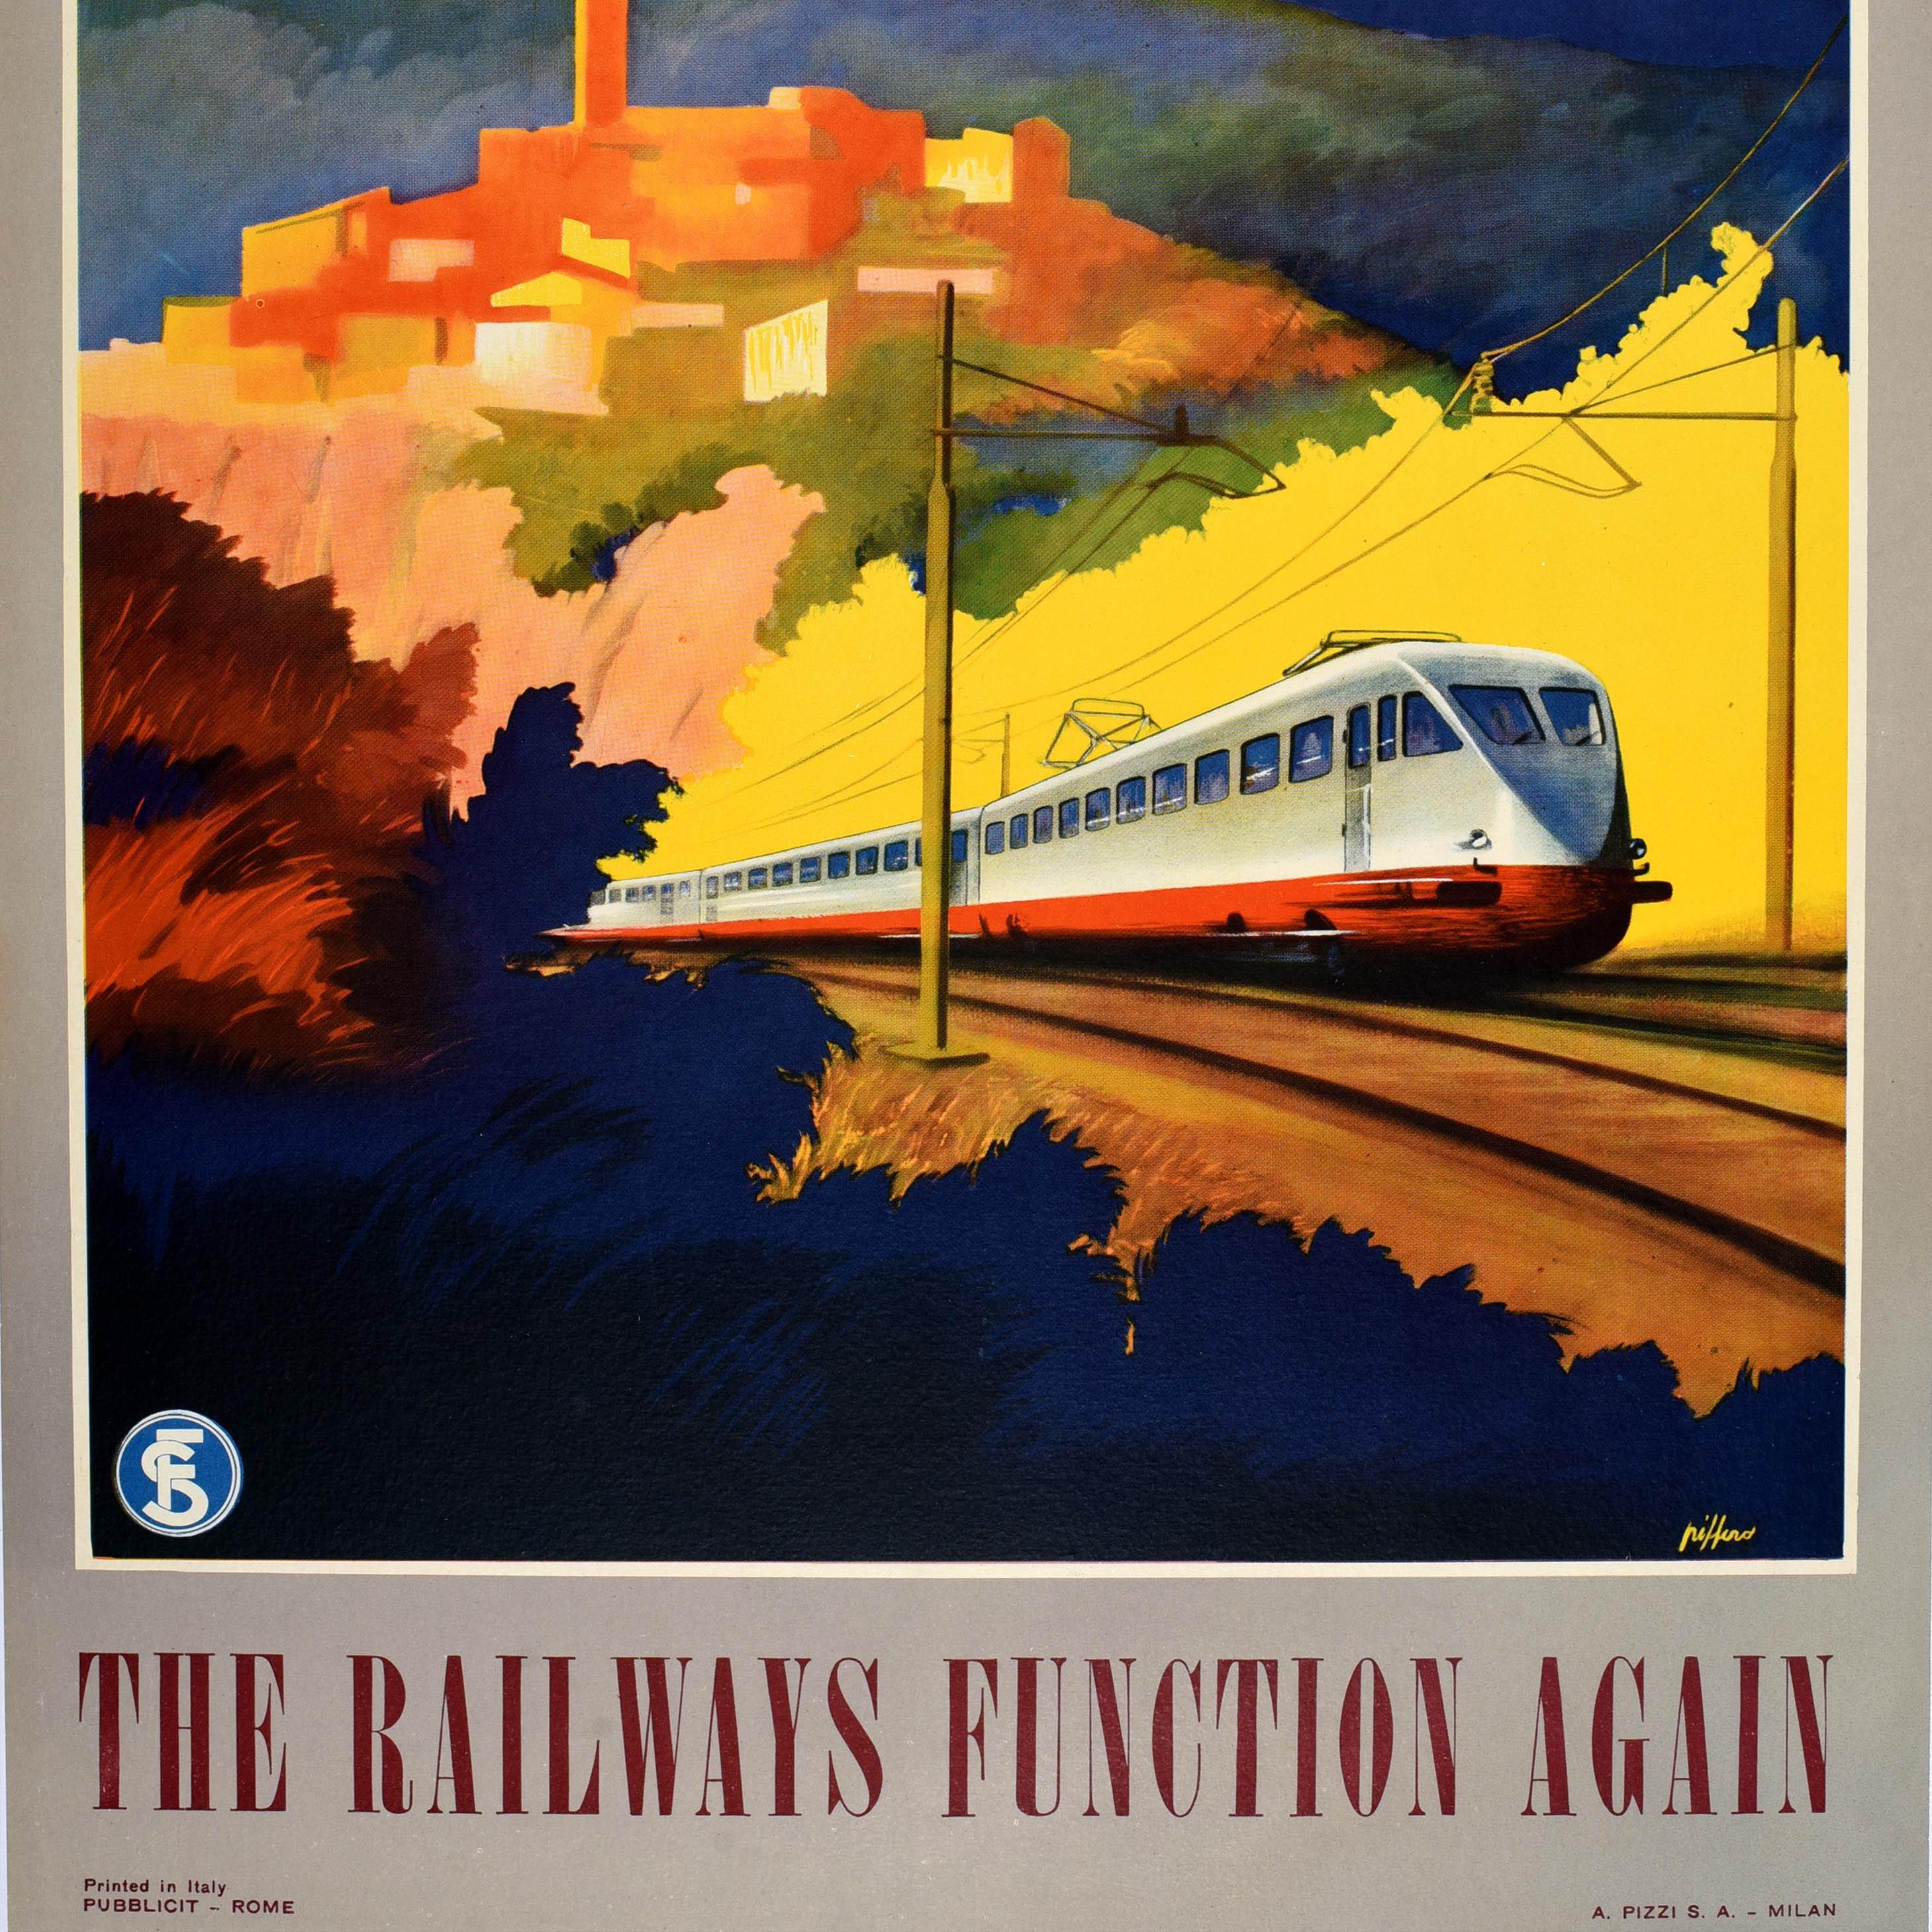 Original Vintage Train Poster Travel Italy Italian State Railways Function Again In Good Condition For Sale In London, GB